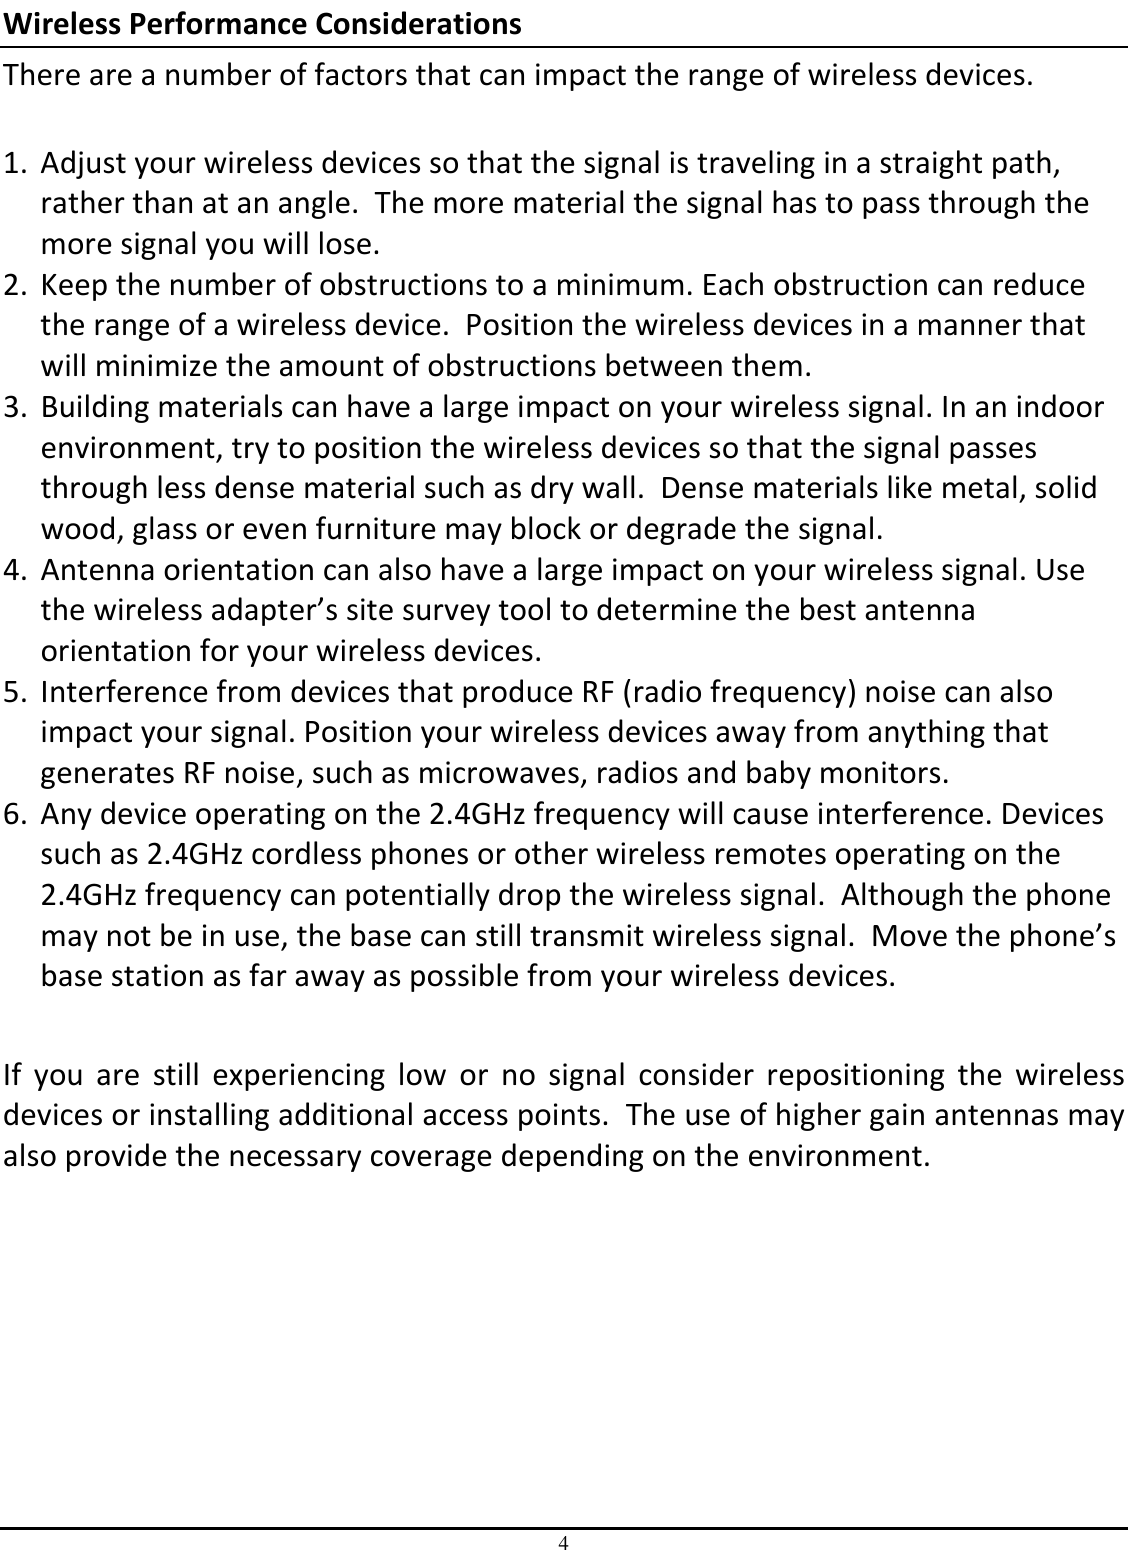 4 Wireless Performance Considerations There are a number of factors that can impact the range of wireless devices.  1. Adjust your wireless devices so that the signal is traveling in a straight path, rather than at an angle.  The more material the signal has to pass through the more signal you will lose. 2. Keep the number of obstructions to a minimum. Each obstruction can reduce the range of a wireless device.  Position the wireless devices in a manner that will minimize the amount of obstructions between them. 3. Building materials can have a large impact on your wireless signal. In an indoor environment, try to position the wireless devices so that the signal passes through less dense material such as dry wall.  Dense materials like metal, solid wood, glass or even furniture may block or degrade the signal. 4. Antenna orientation can also have a large impact on your wireless signal. Use the wireless adapter’s site survey tool to determine the best antenna orientation for your wireless devices. 5. Interference from devices that produce RF (radio frequency) noise can also impact your signal. Position your wireless devices away from anything that generates RF noise, such as microwaves, radios and baby monitors.  6. Any device operating on the 2.4GHz frequency will cause interference. Devices such as 2.4GHz cordless phones or other wireless remotes operating on the 2.4GHz frequency can potentially drop the wireless signal.  Although the phone may not be in use, the base can still transmit wireless signal.  Move the phone’s base station as far away as possible from your wireless devices.   If  you  are  still  experiencing  low  or  no  signal  consider  repositioning  the  wireless devices or installing additional access points.  The use of higher gain antennas may also provide the necessary coverage depending on the environment.    